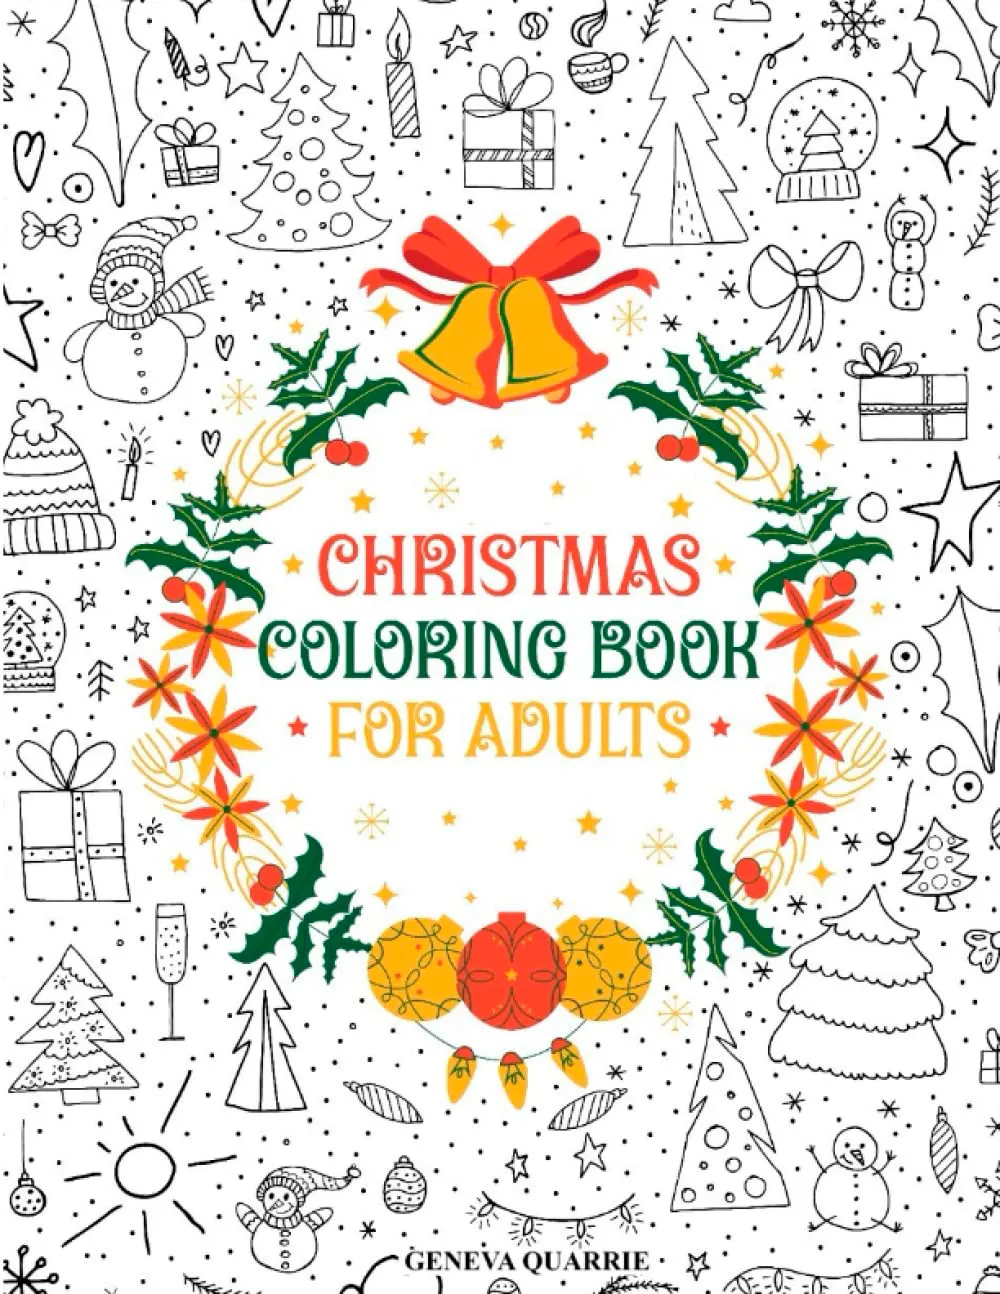 Christmas Eve boxes Colouring book